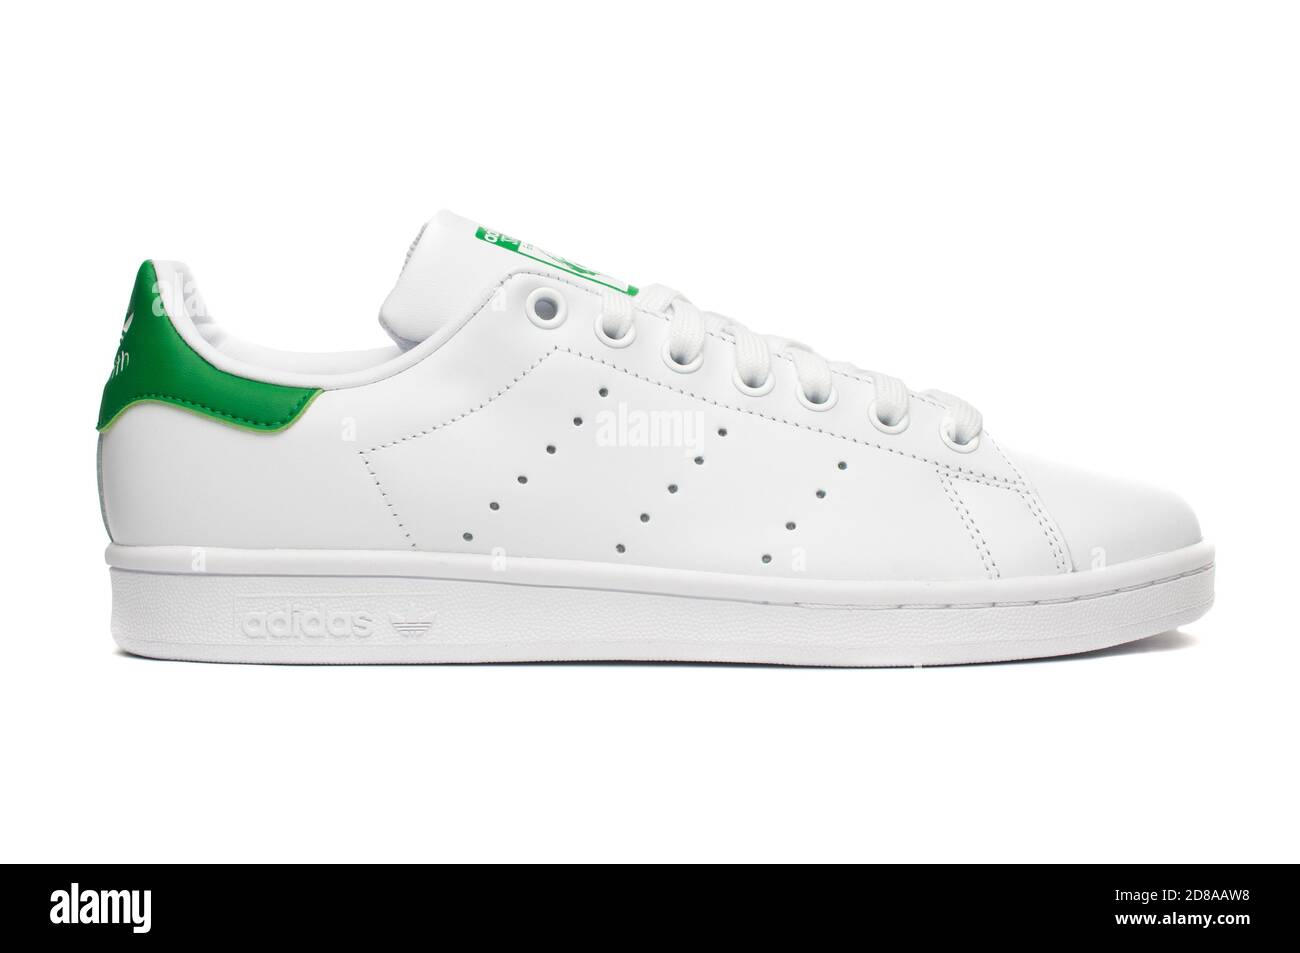 Carrara, Italy - October 28, 2020 - Adidas Stan Smith sneaker classic  (white and green) isolated on white background Stock Photo - Alamy